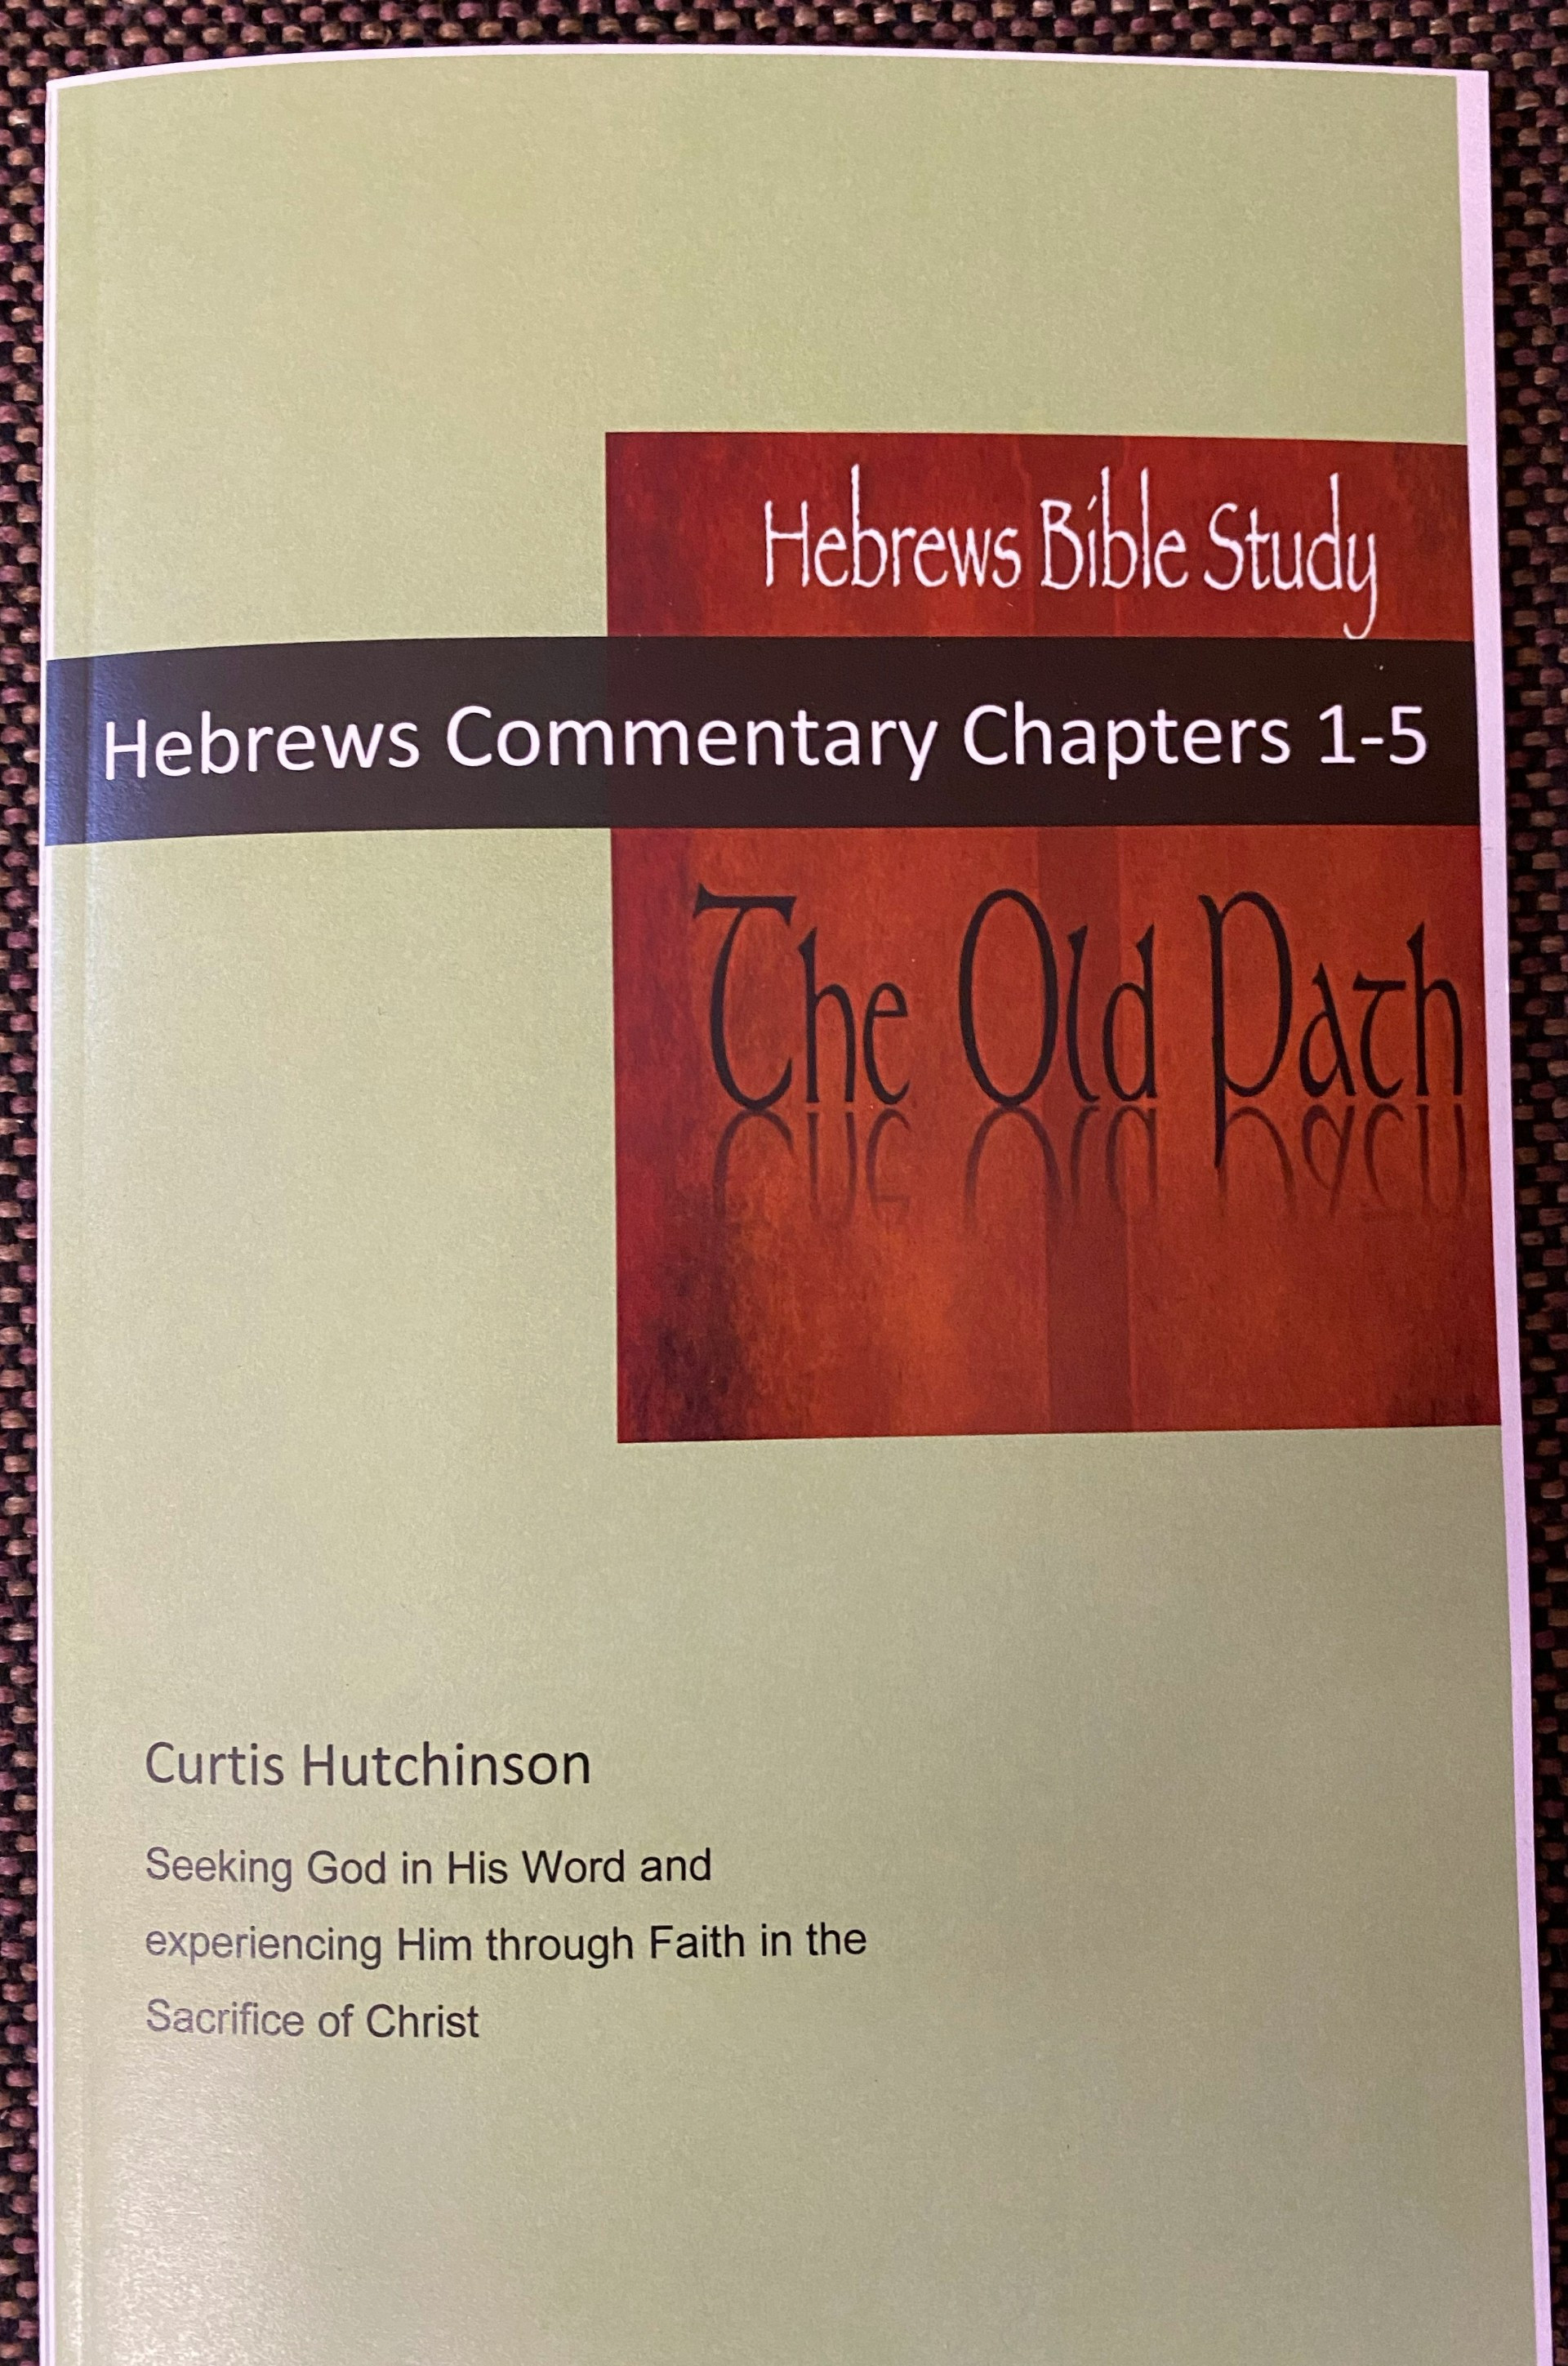 Hebrews Bible Commentary Chapters 1-5